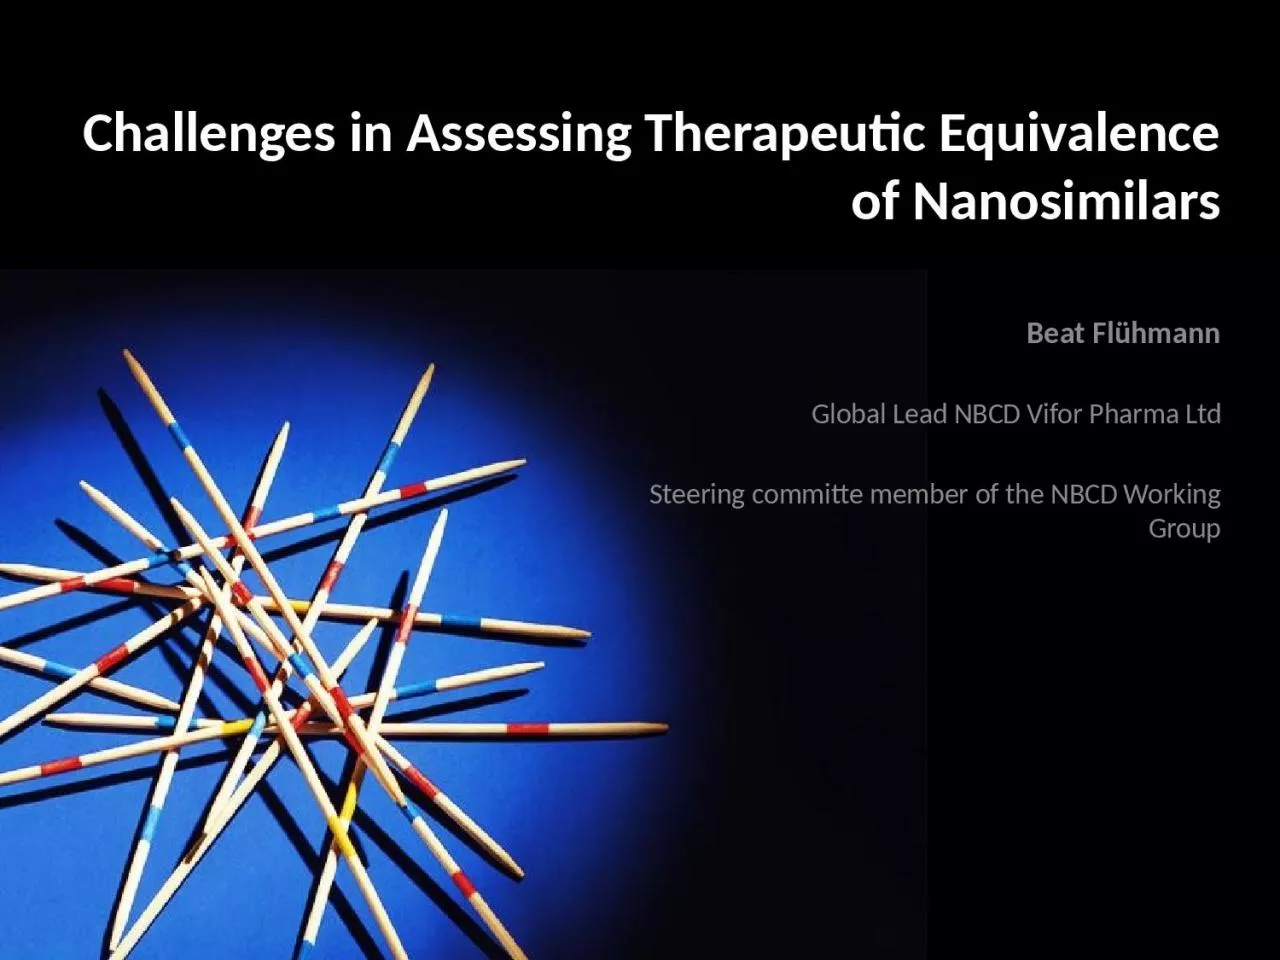 Challenges in Assessing Therapeutic Equivalence of